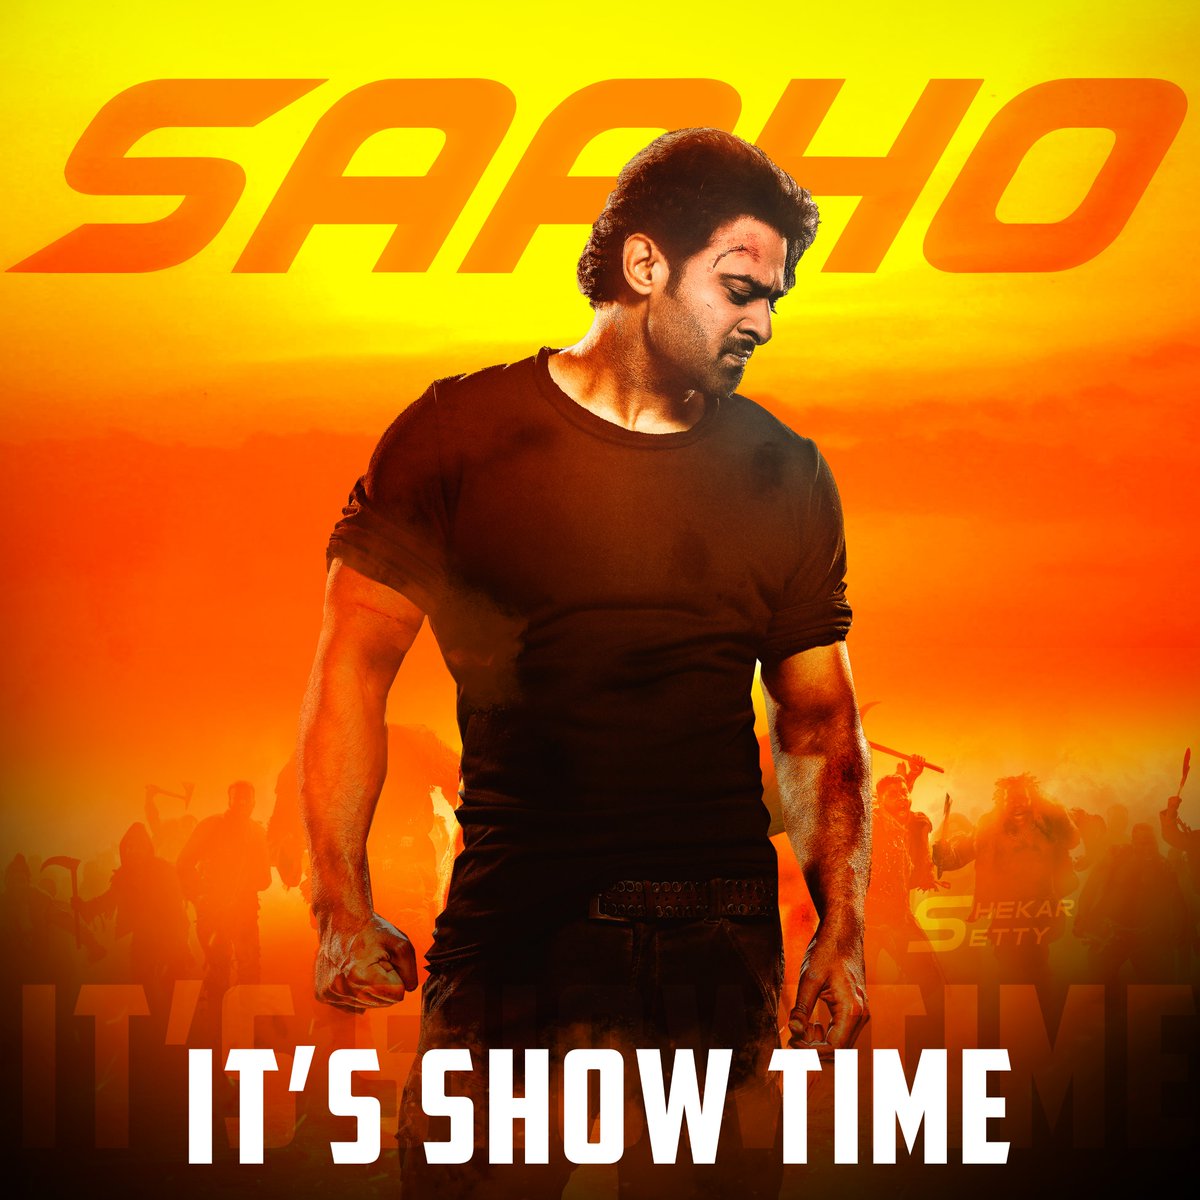 #30AugWithSaaho #Saaho
@TrendsPrabhas
IT’S SHOW TIME😎
We are just few hours away from the grand WW release of #Saaho🔥
#SaahoFromTomorrow #SaahoCDP
#SaahoFeverEverywhere🤘🏻